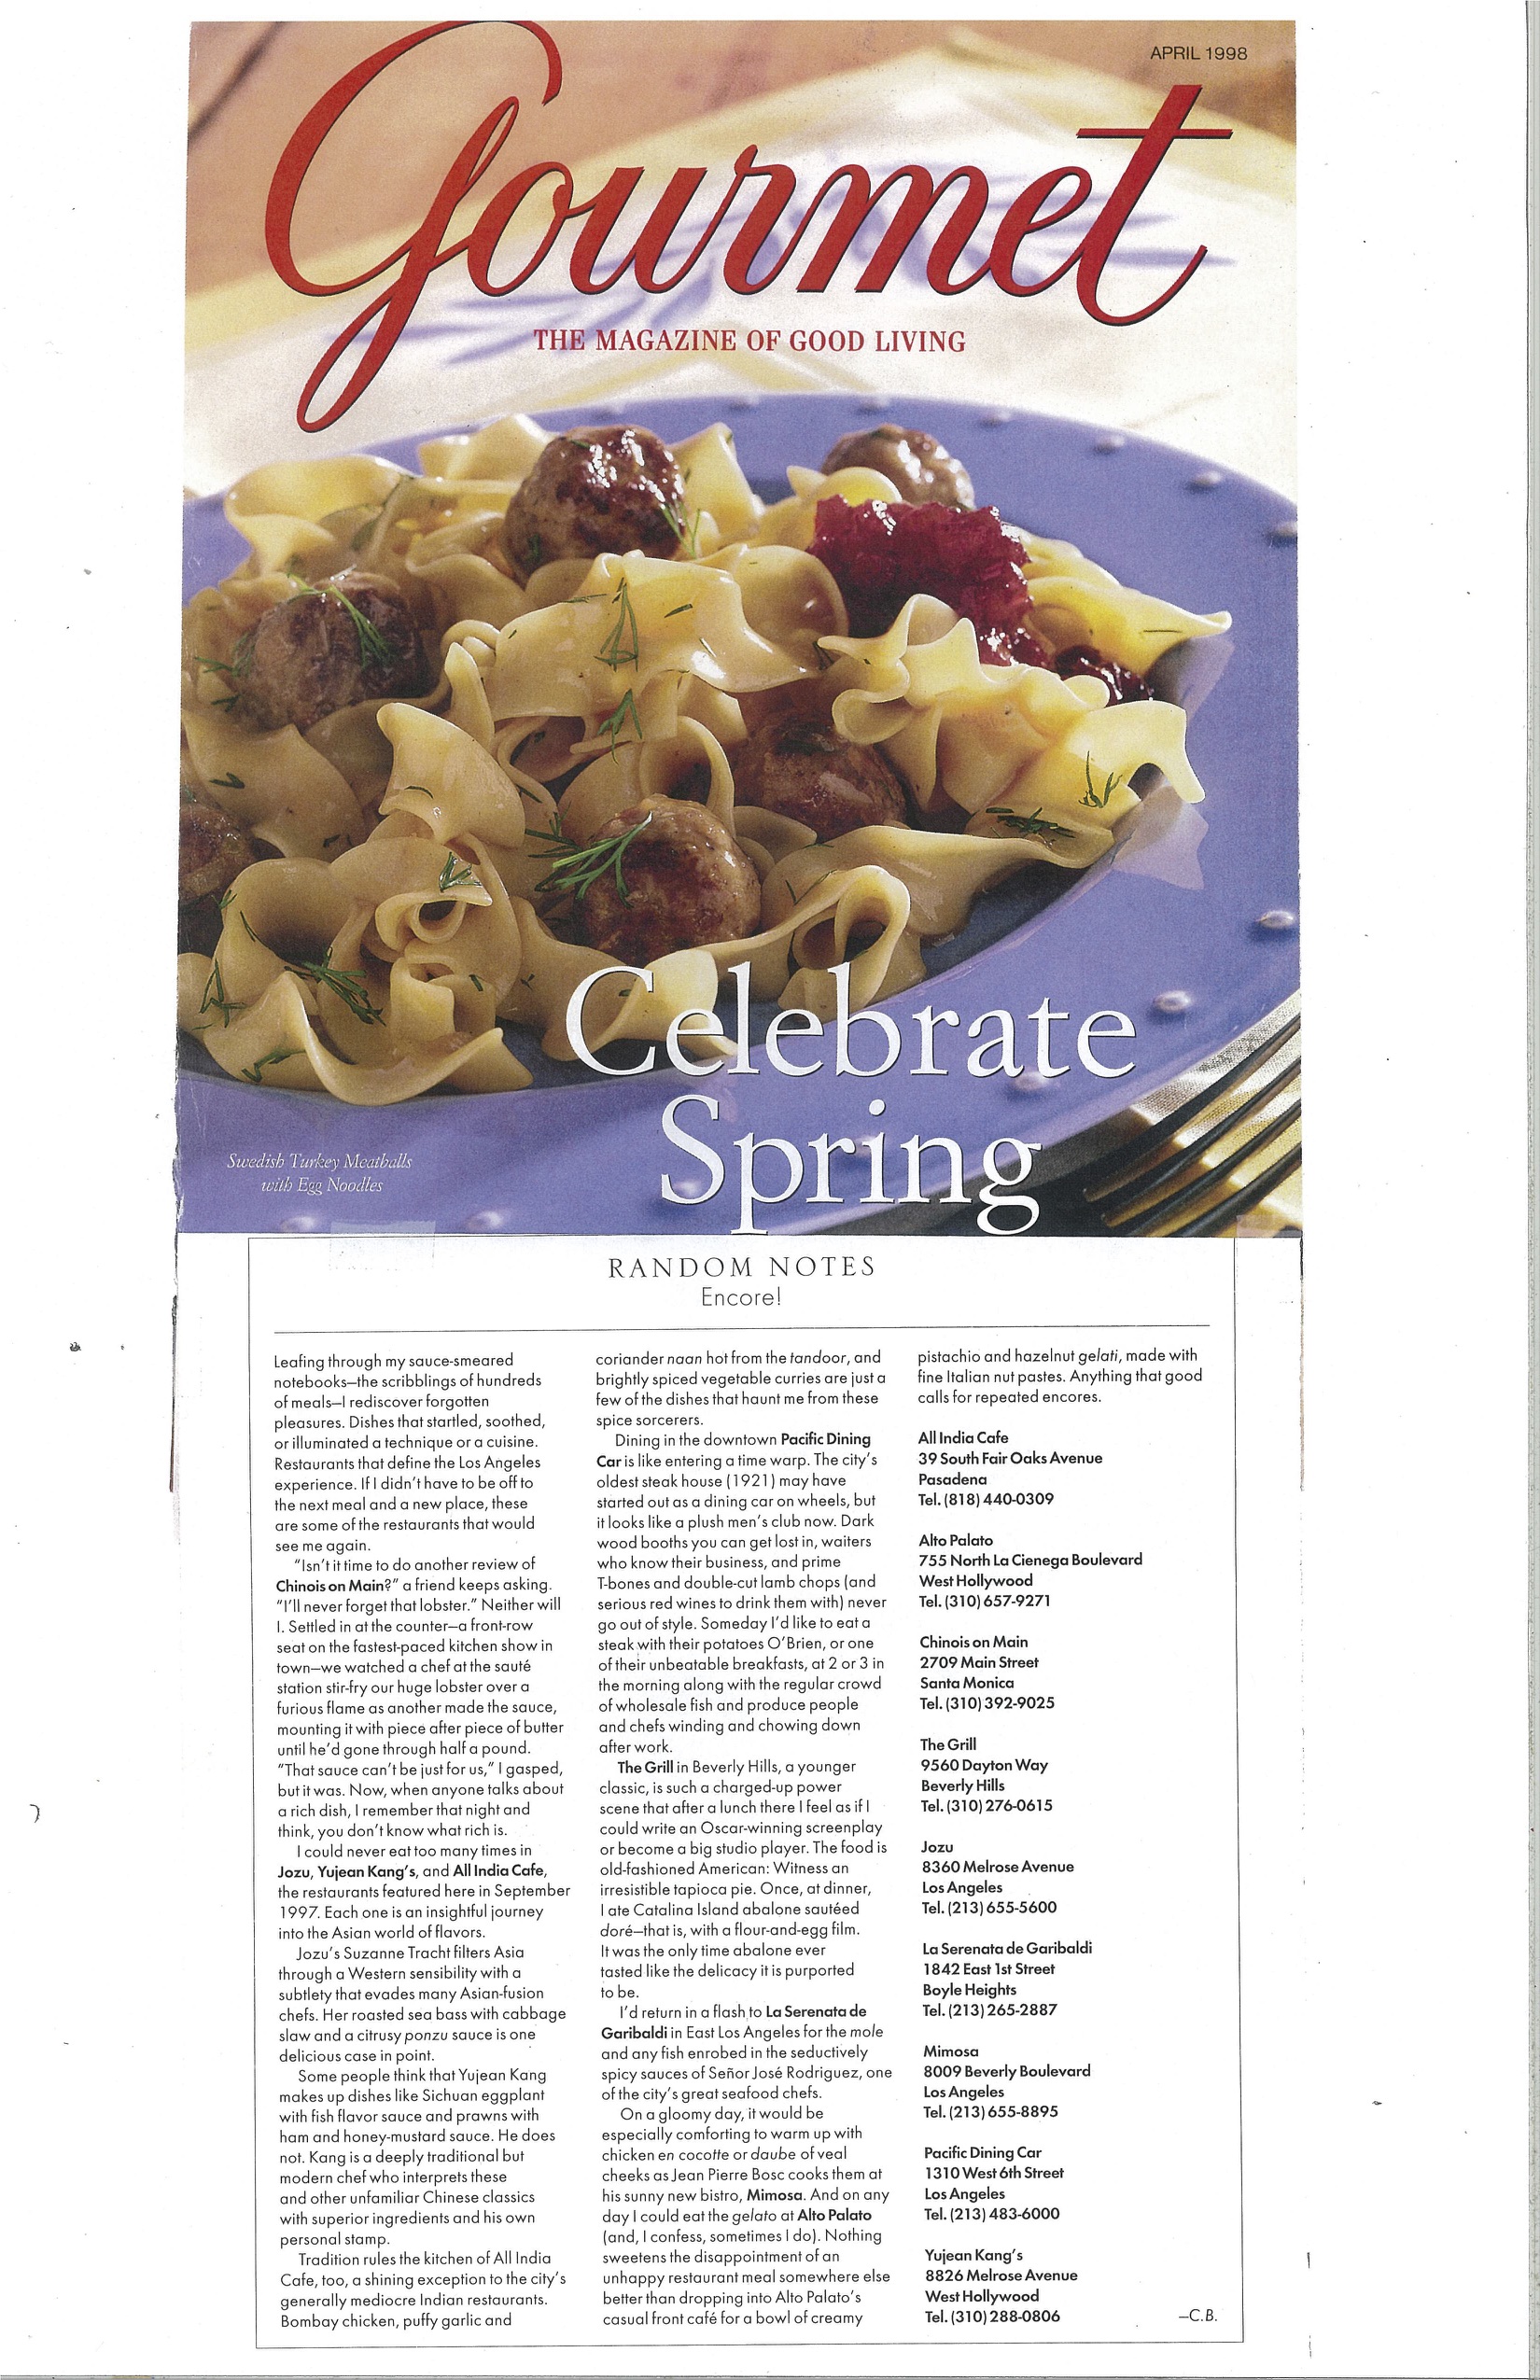  Another press clipping of All India Cafe featured in Gourmet Magazine. 